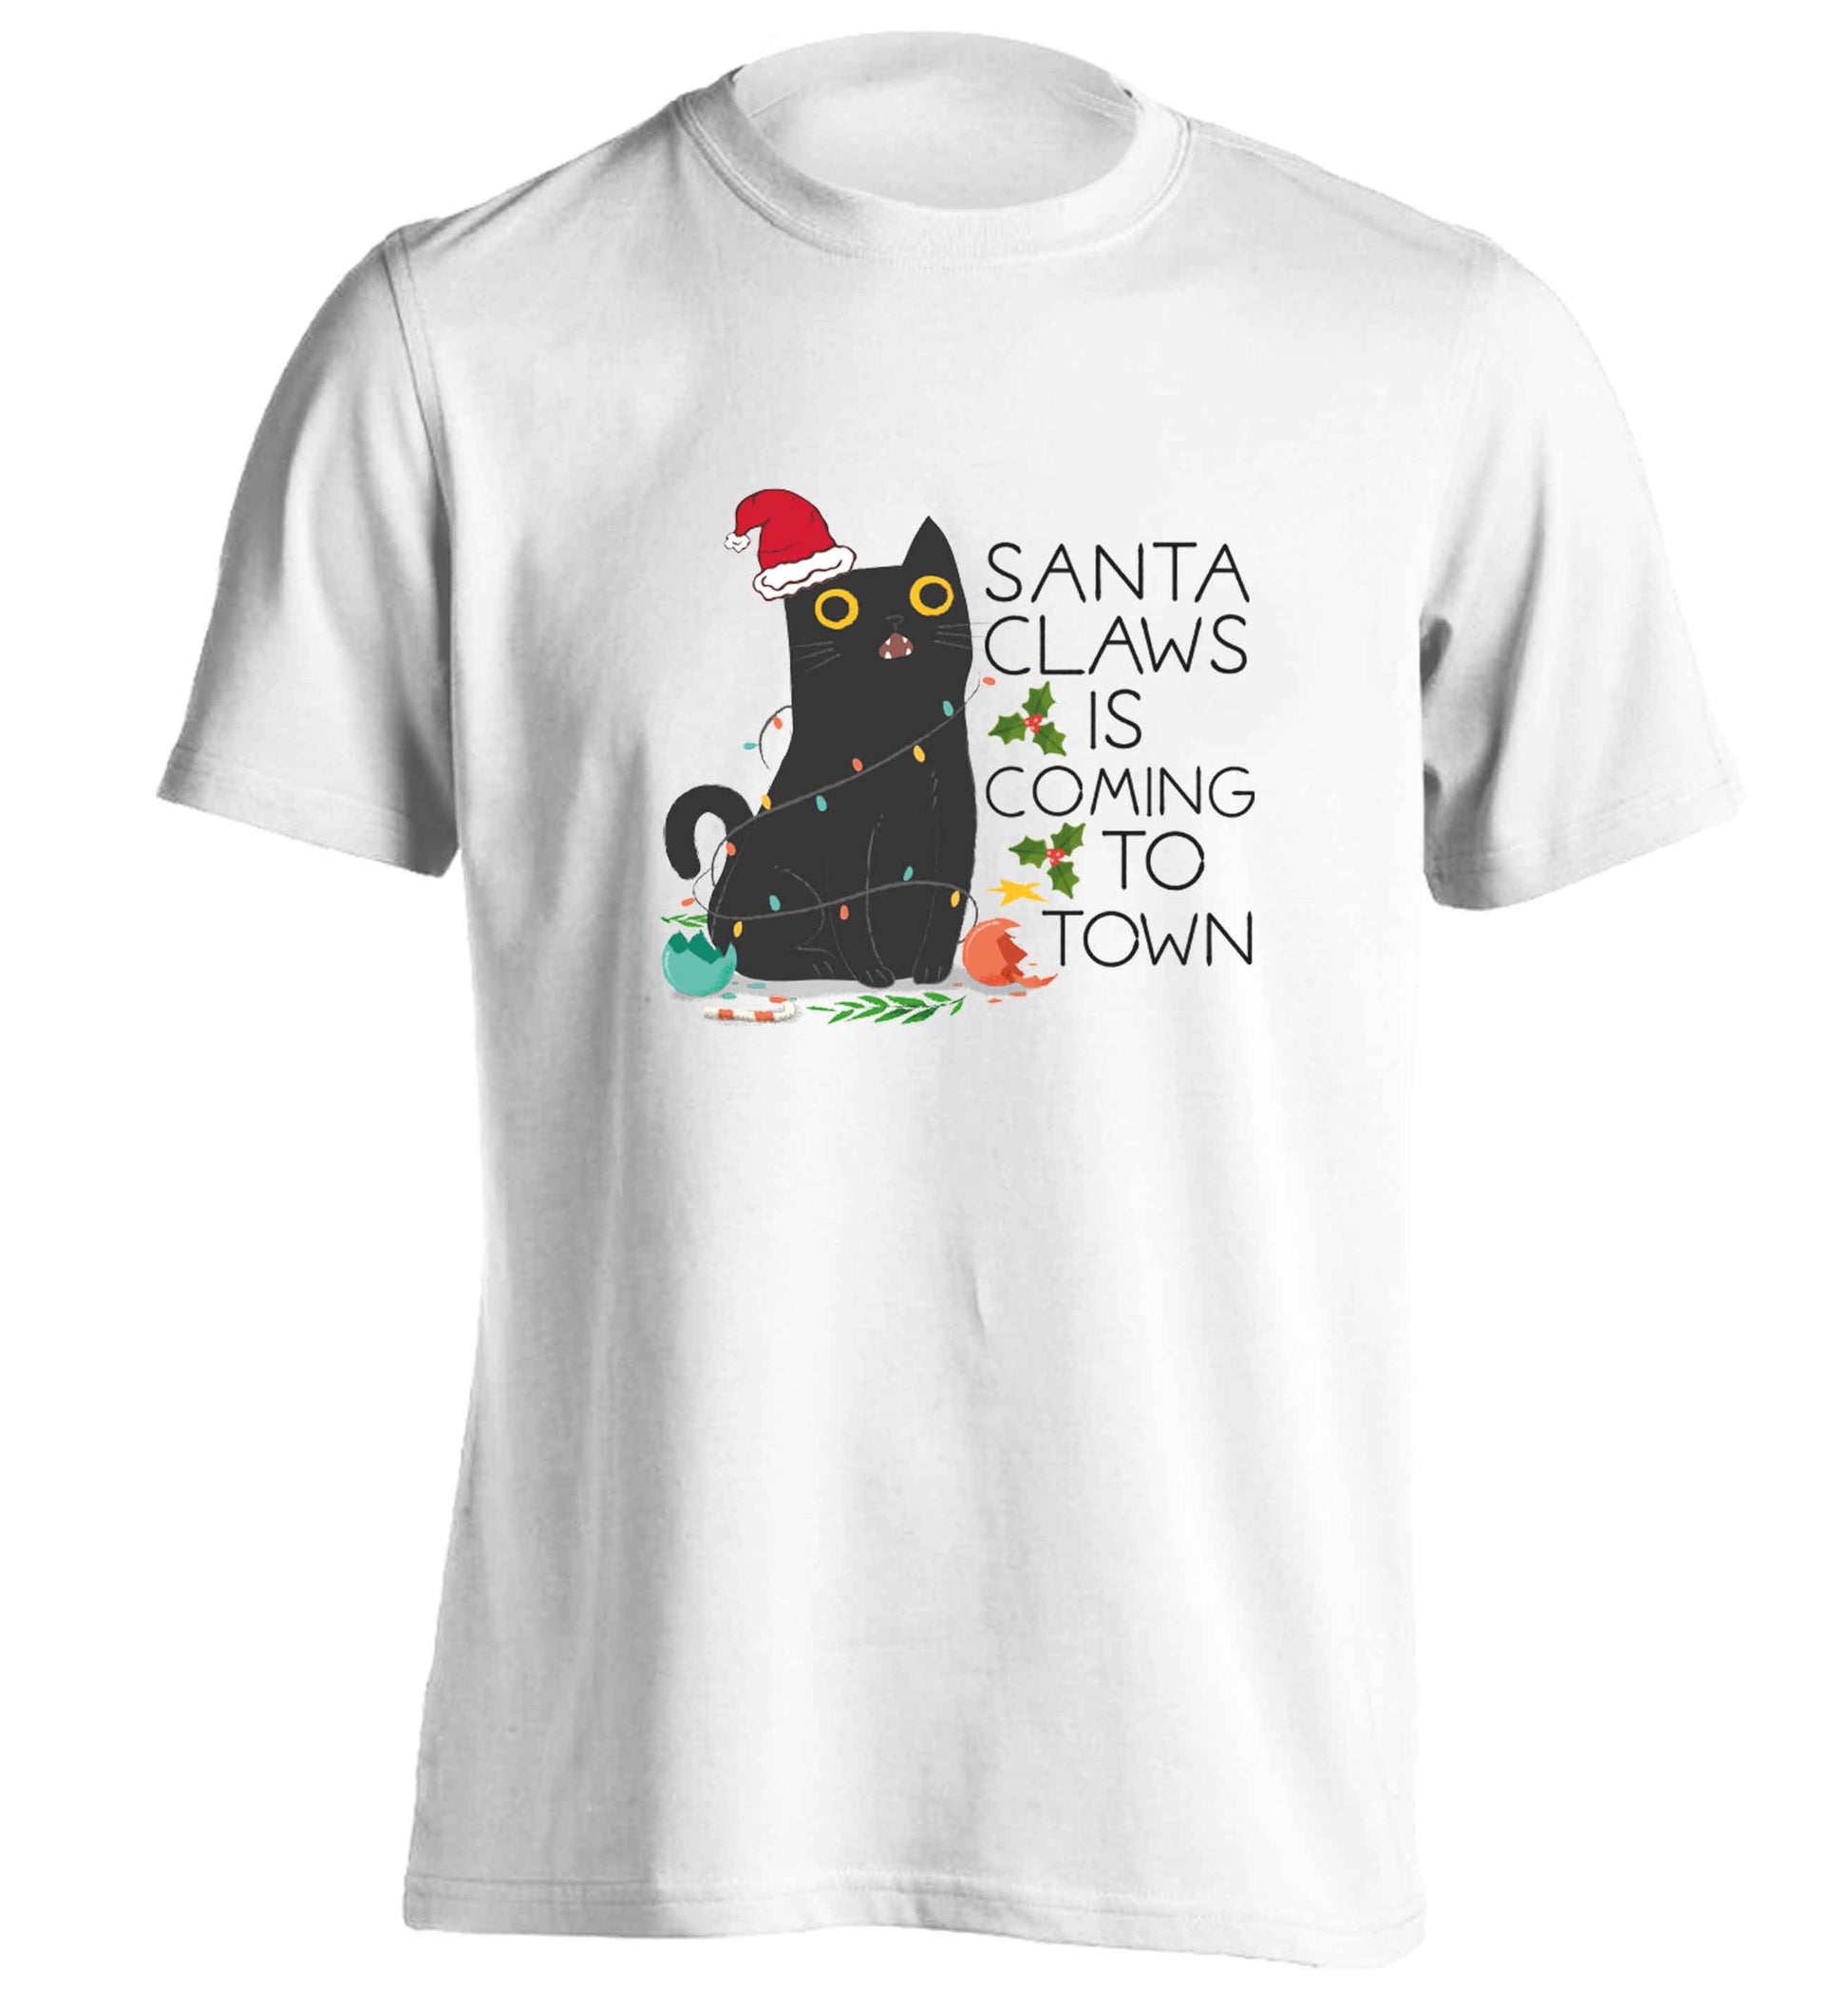 Santa claws is coming to town  adults unisex white Tshirt 2XL